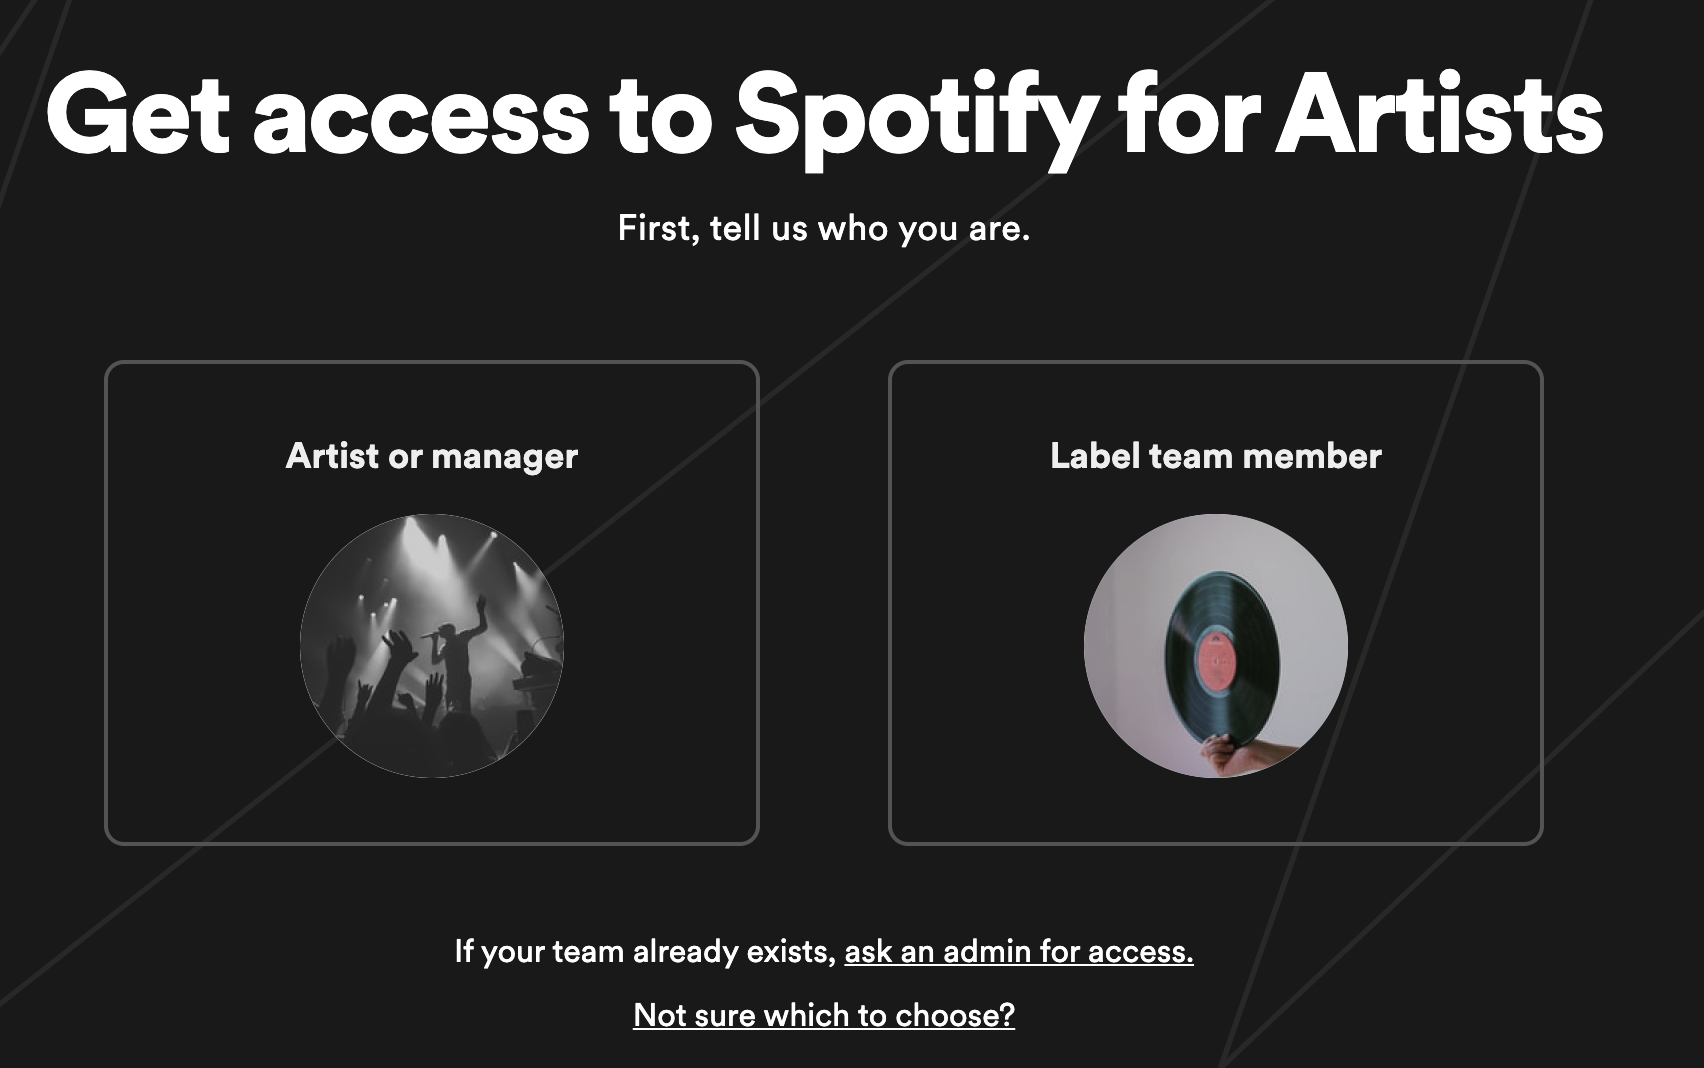 Get access to Spotify for Artists